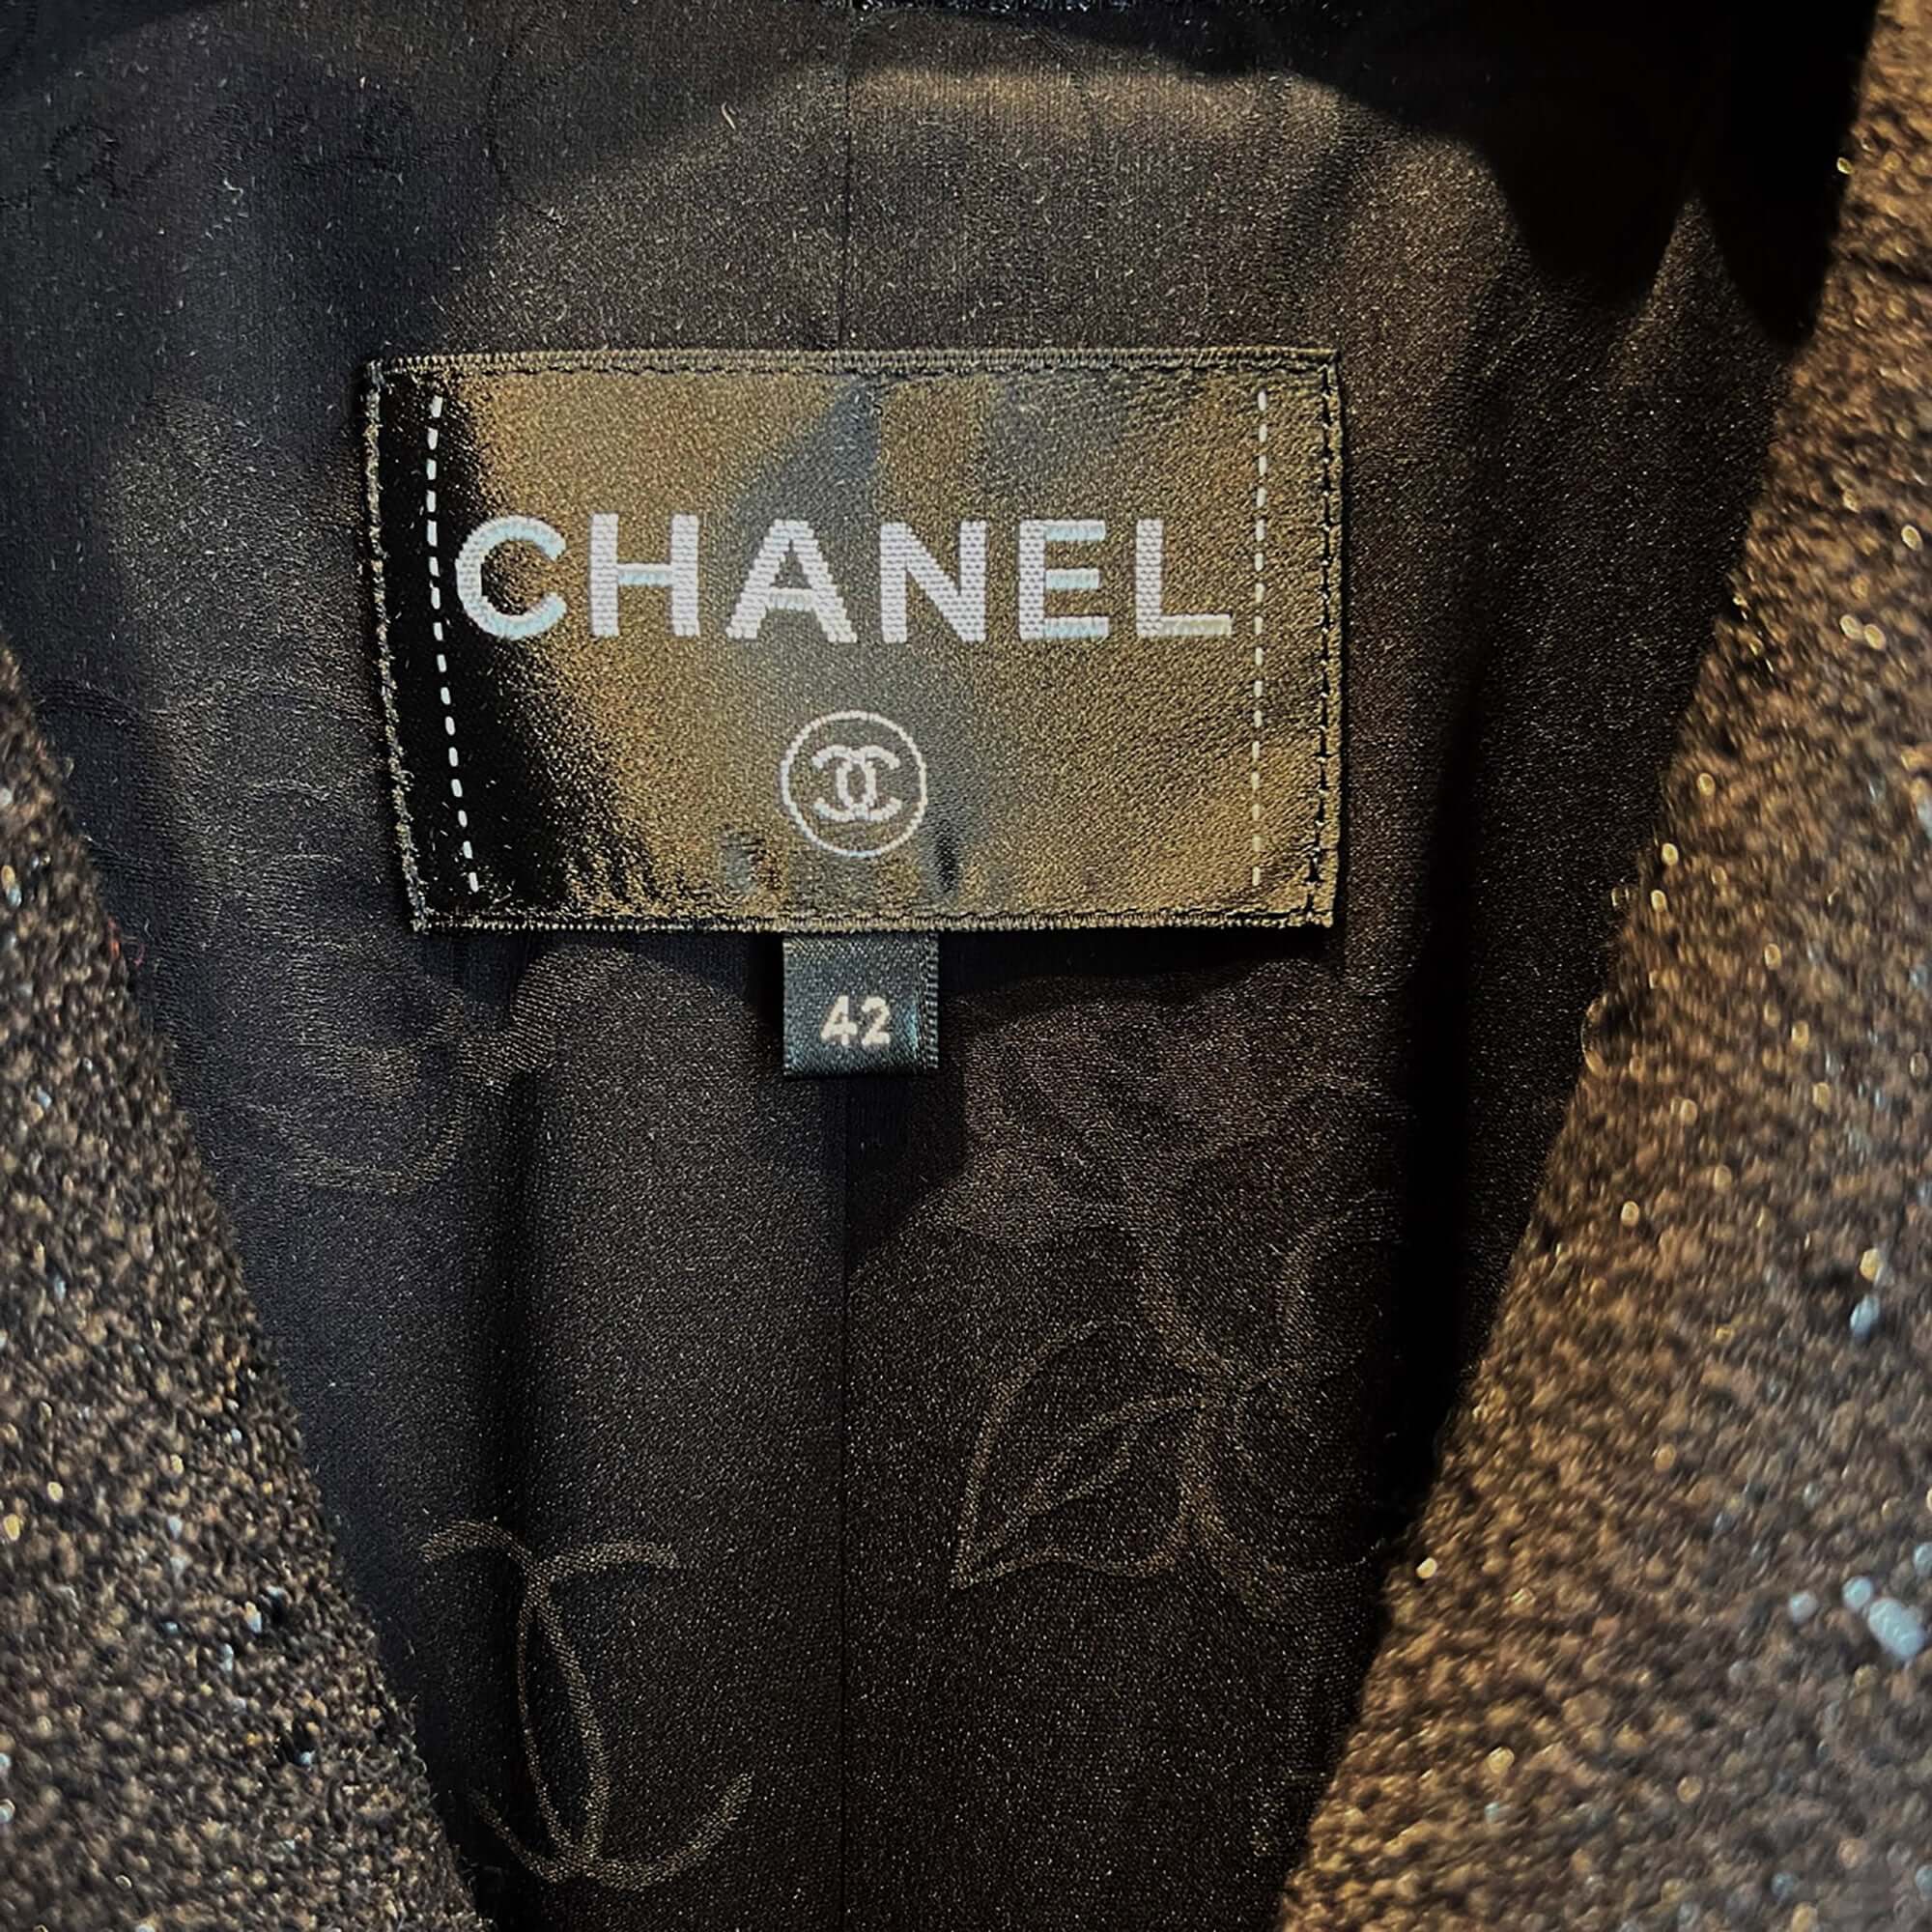 Chanel black jacket with white buttons